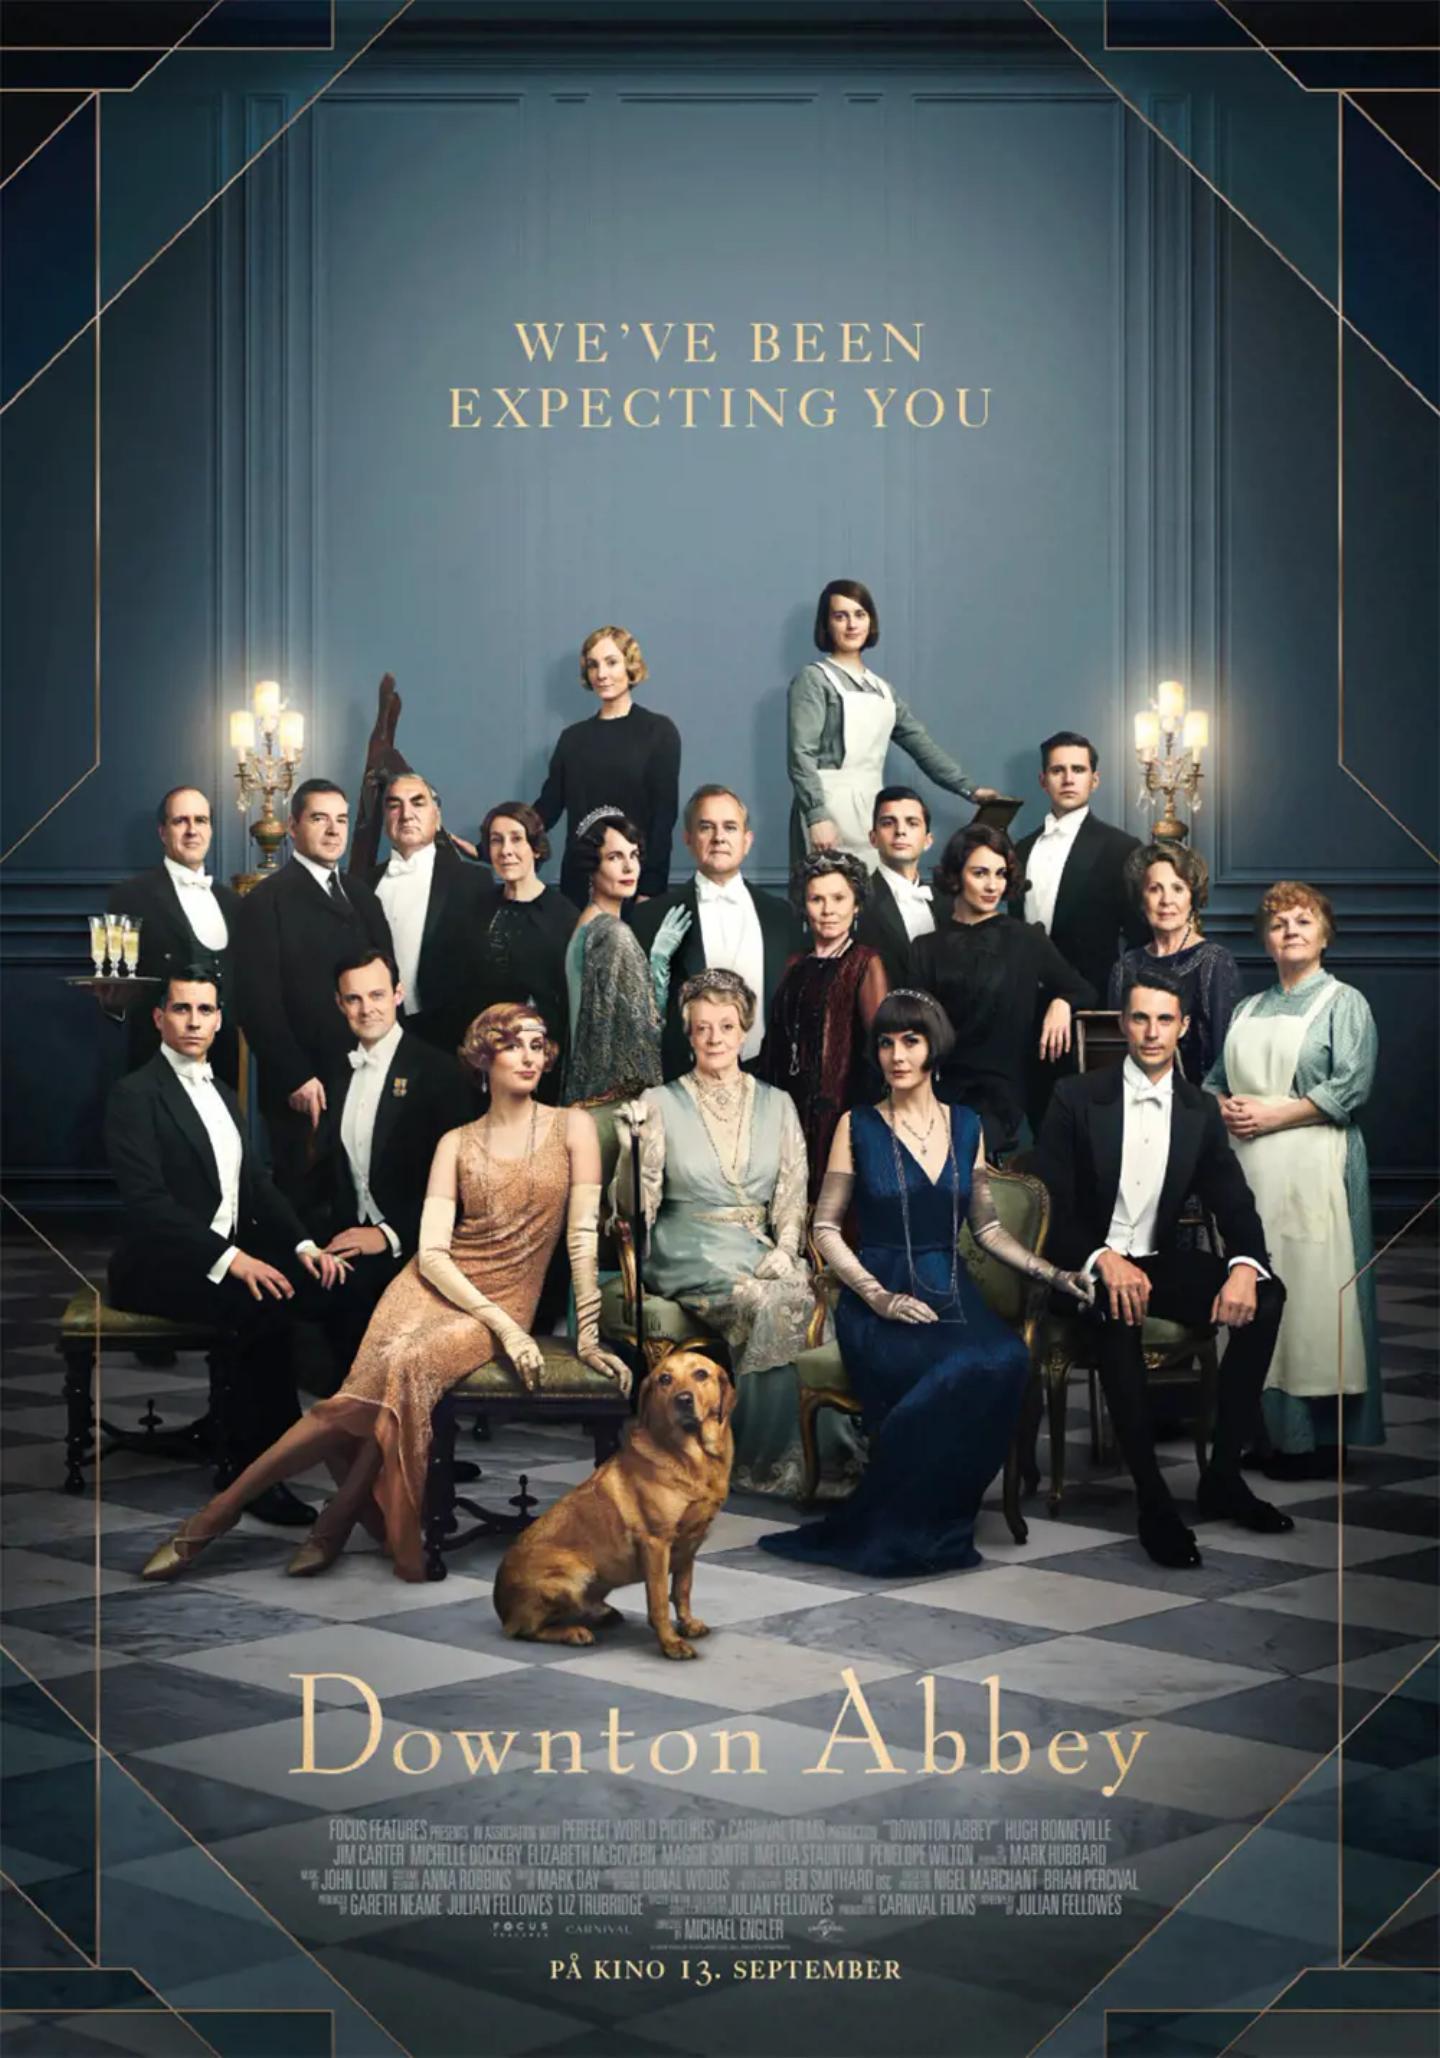 Plakat for 'Downton Abbey'